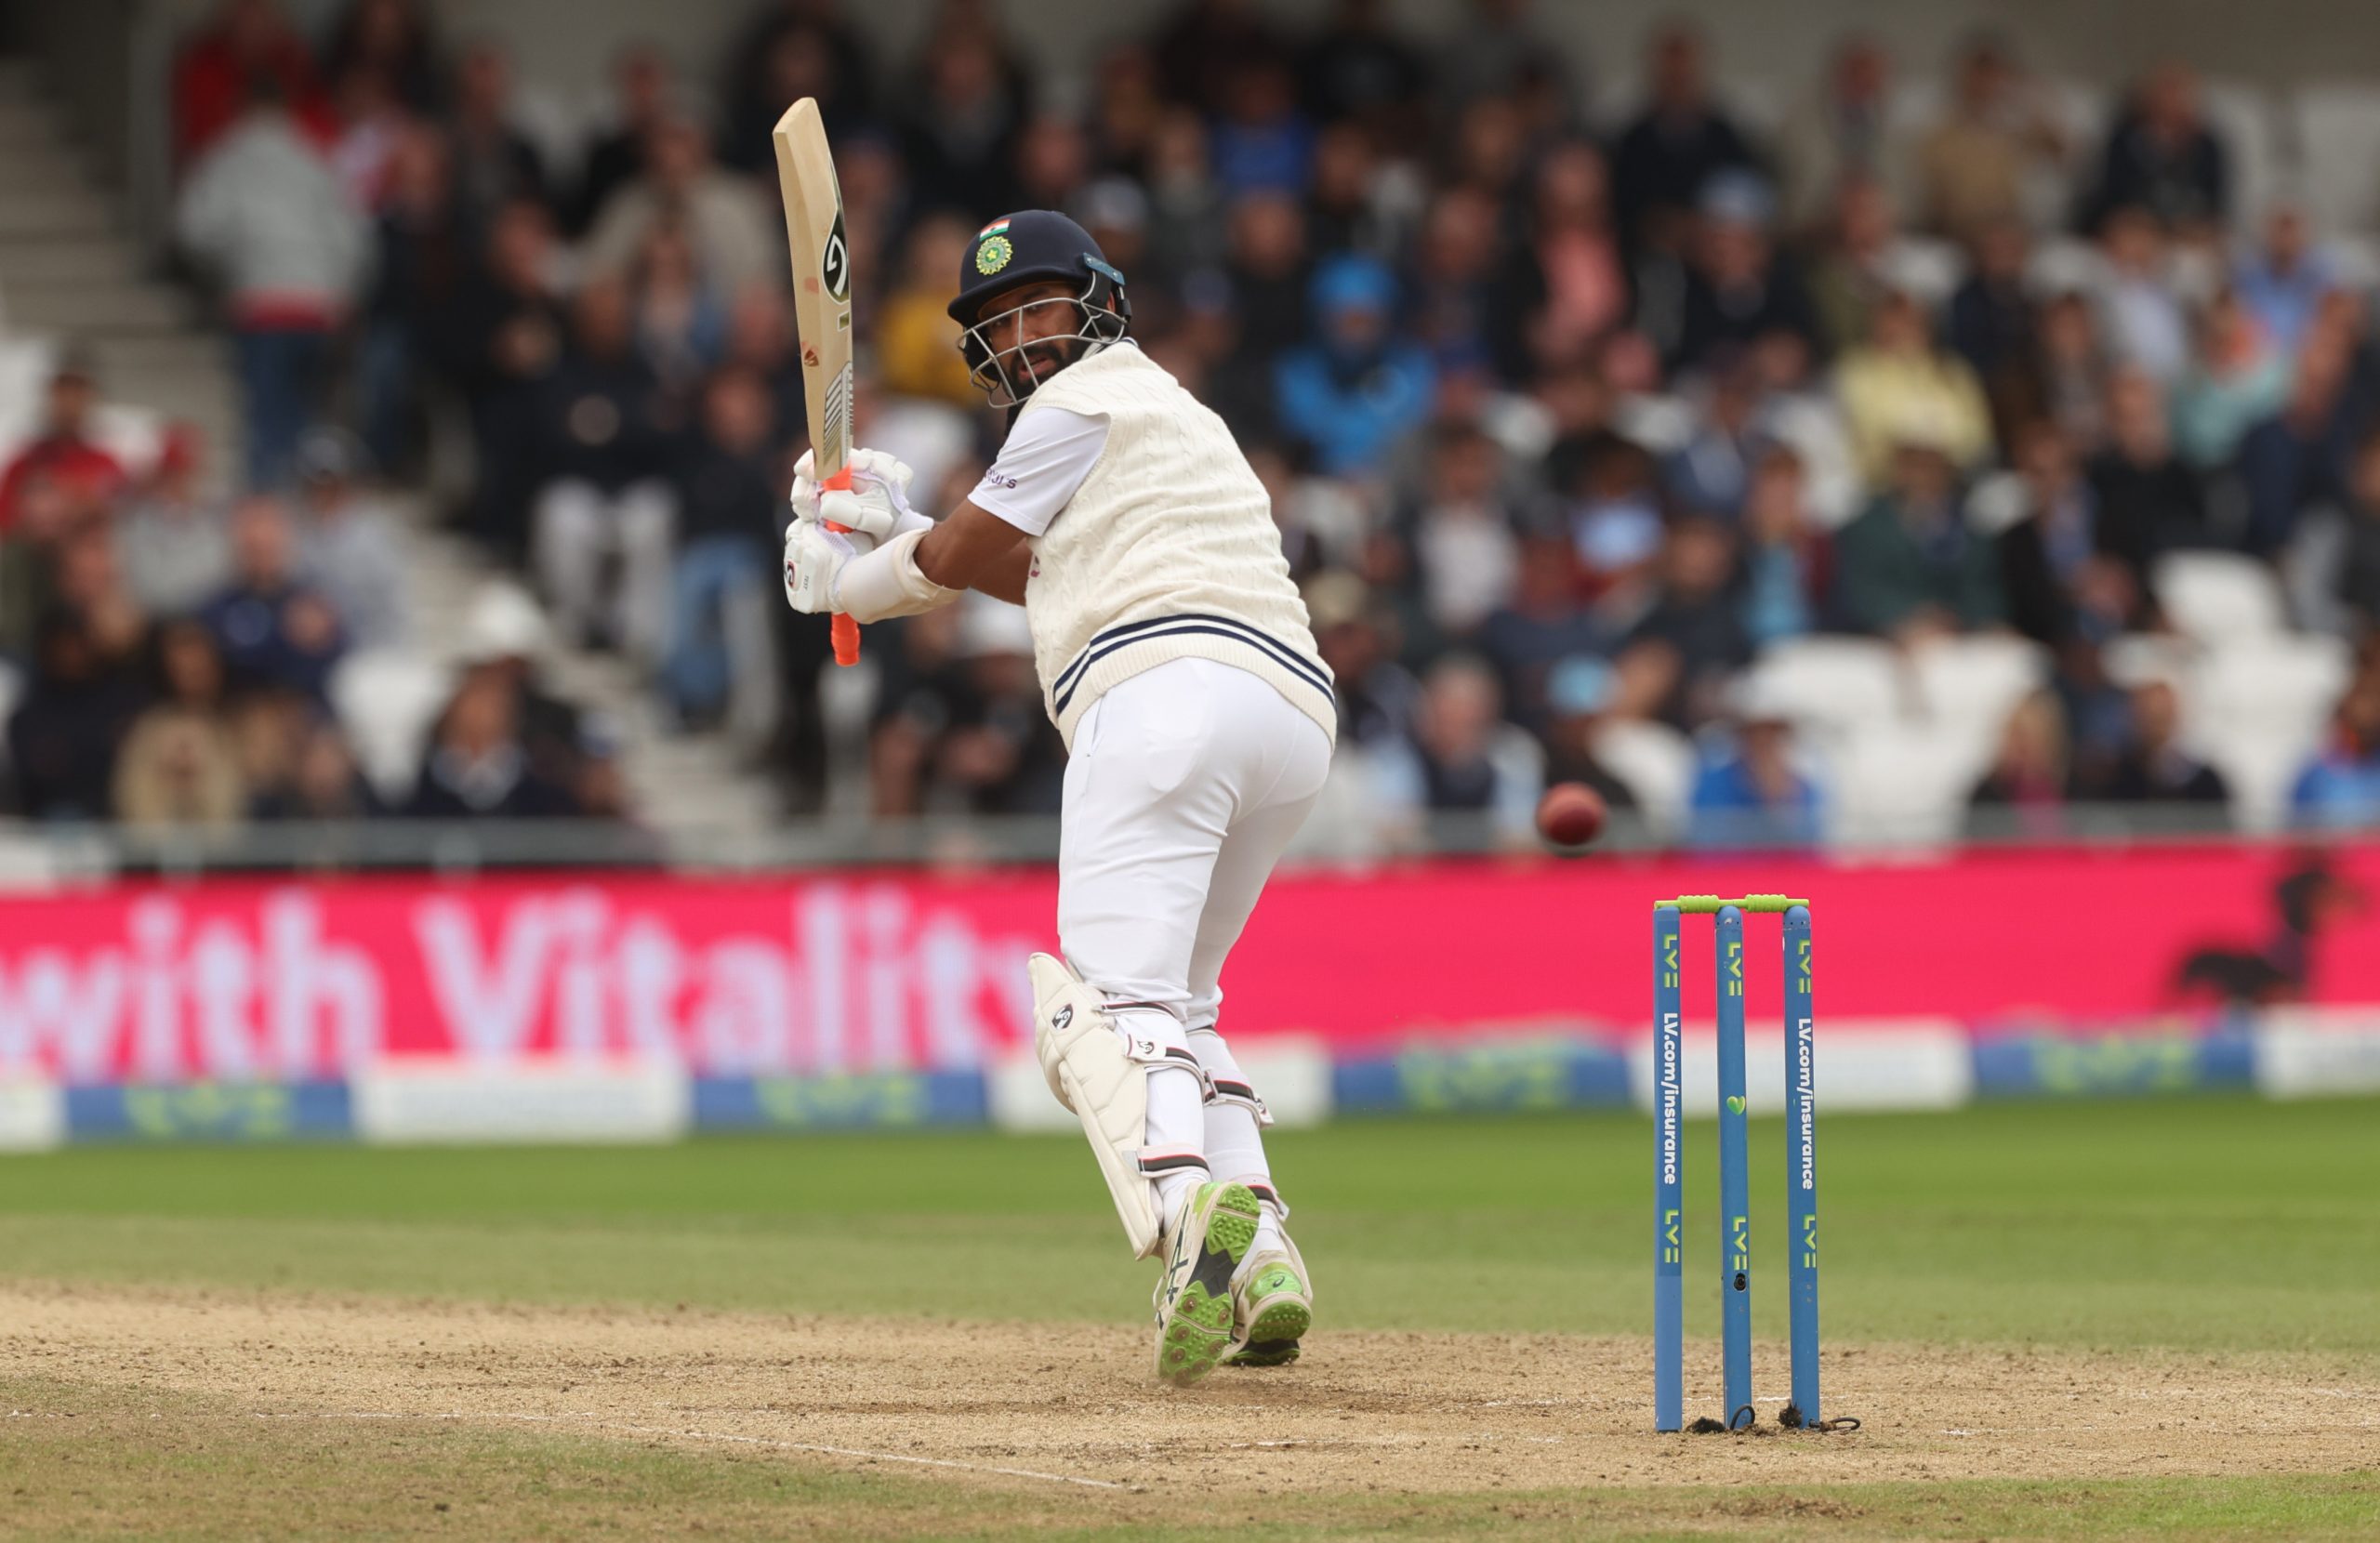 Pakistan’s Rizwan and India’s Pujara team up for Sussex